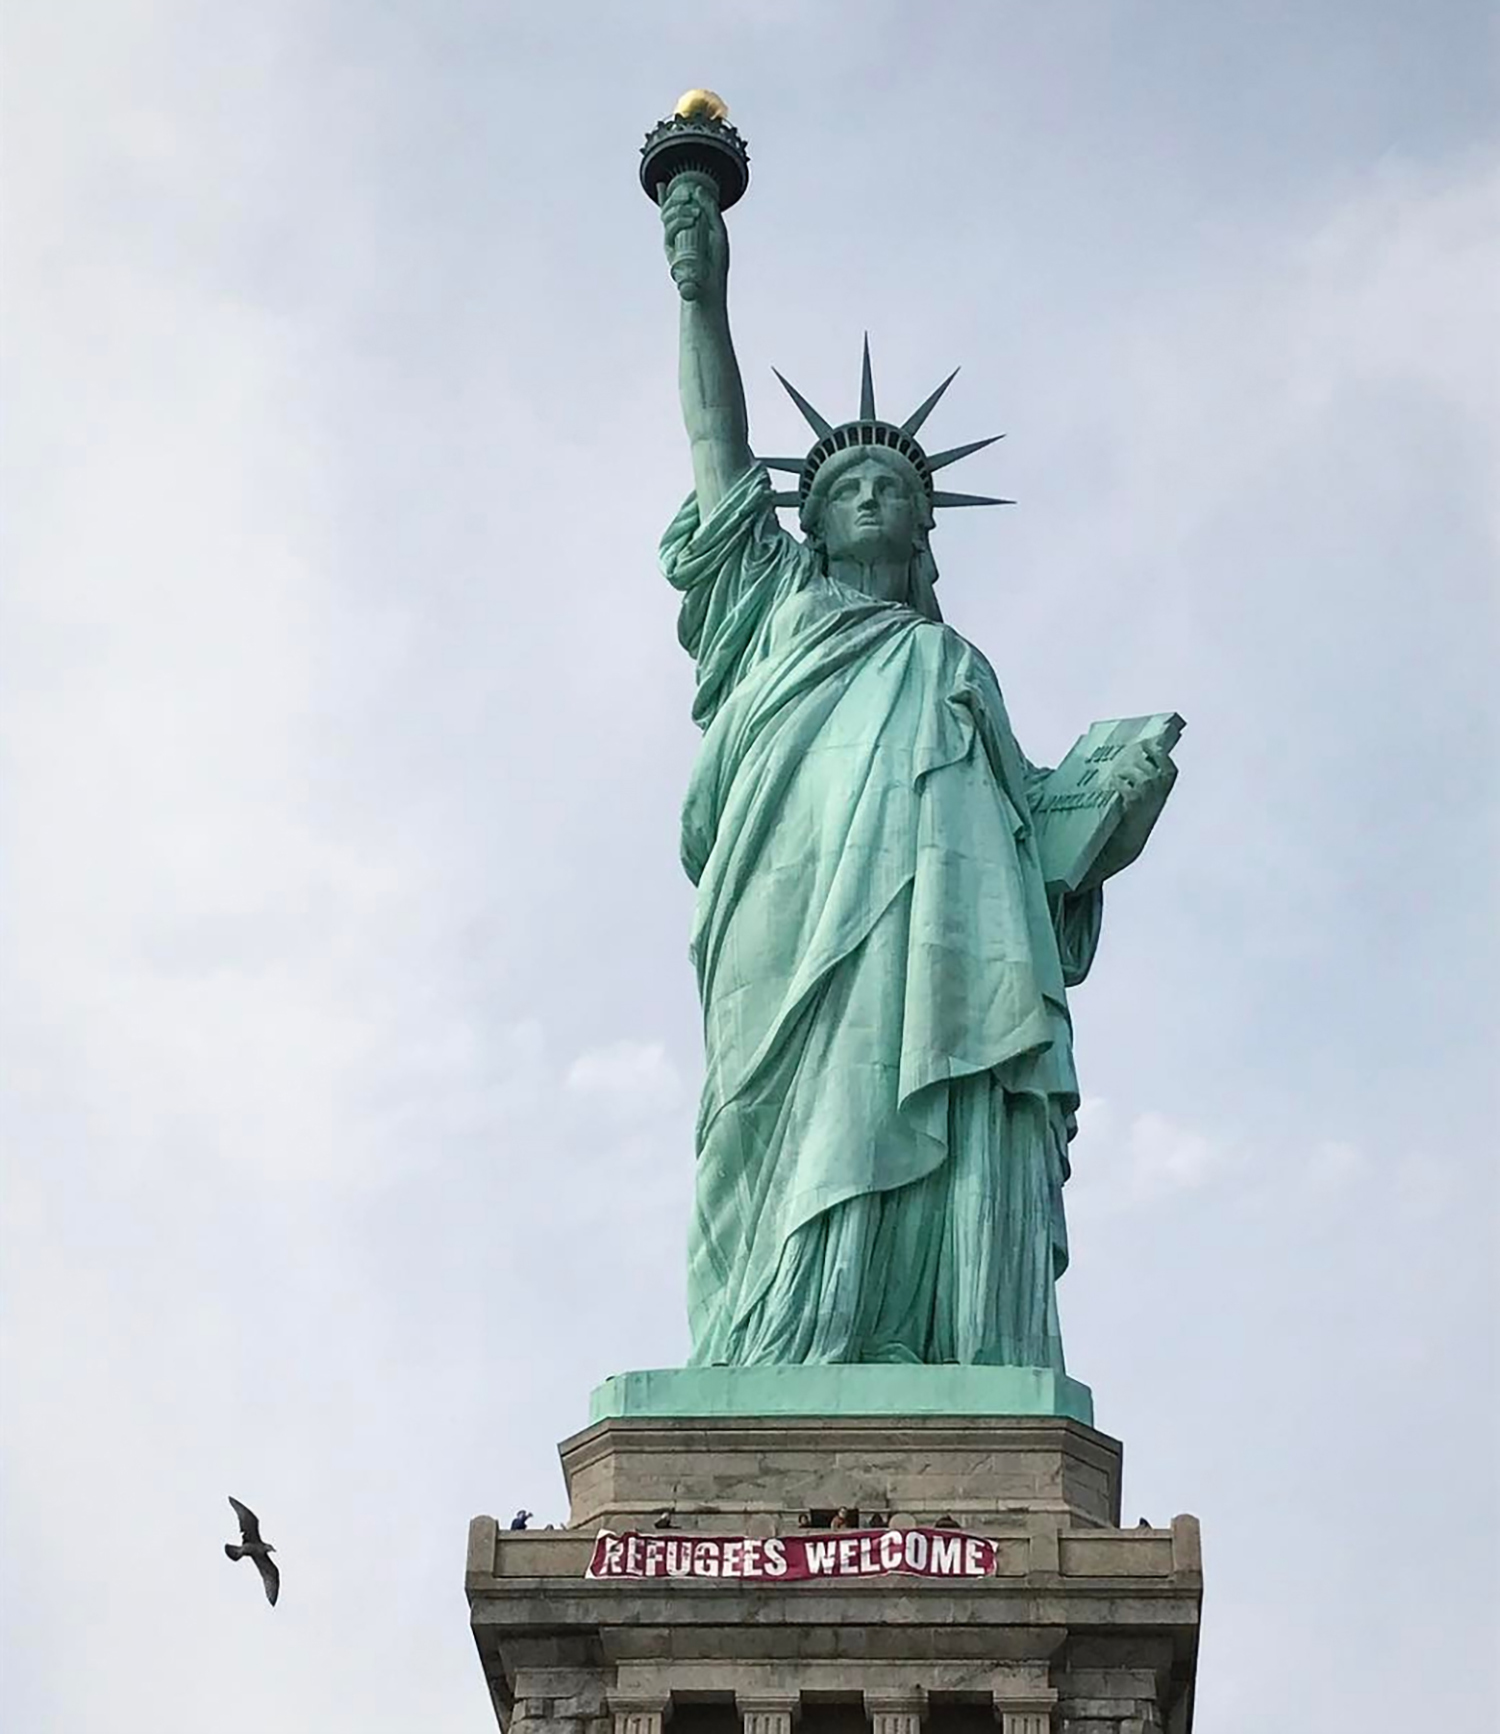 In this photo provided by VitÃ³ria Londero, a giant banner saying "Refugees Welcome" hangs on the pedestal of the Statue of Liberty, Tuesday, Feb. 21, 2017, in New York. National Park Service spokesman Jerry Willis says the banner was hung from the public observation deck at the top of the statue's pedestal Tuesday afternoon. (VitÃ³ria Londero via AP)